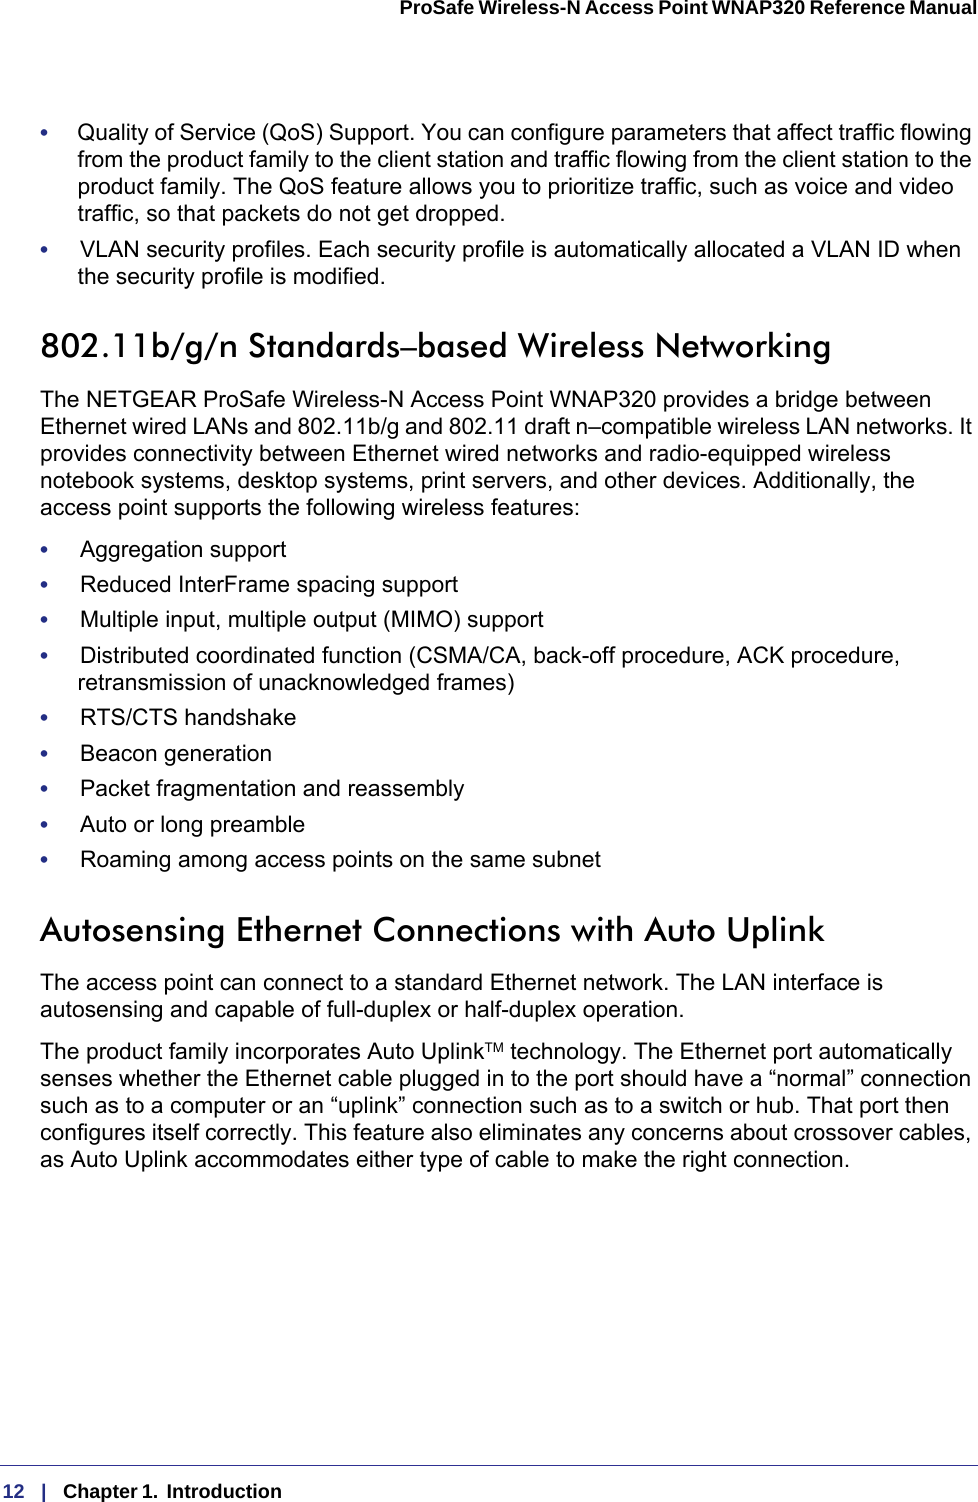 12   |   Chapter 1.  Introduction  ProSafe Wireless-N Access Point WNAP320 Reference Manual •     Quality of Service (QoS) Support. You can configure parameters that affect traffic flowing from the product family to the client station and traffic flowing from the client station to the product family. The QoS feature allows you to prioritize traffic, such as voice and video traffic, so that packets do not get dropped.•     VLAN security profiles. Each security profile is automatically allocated a VLAN ID when the security profile is modified.802.11b/g/n Standards–based Wireless NetworkingThe NETGEAR ProSafe Wireless-N Access Point WNAP320 provides a bridge between Ethernet wired LANs and 802.11b/g and 802.11 draft n–compatible wireless LAN networks. It provides connectivity between Ethernet wired networks and radio-equipped wireless notebook systems, desktop systems, print servers, and other devices. Additionally, the access point supports the following wireless features:•     Aggregation support•     Reduced InterFrame spacing support•     Multiple input, multiple output (MIMO) support•     Distributed coordinated function (CSMA/CA, back-off procedure, ACK procedure, retransmission of unacknowledged frames)•     RTS/CTS handshake•     Beacon generation•     Packet fragmentation and reassembly•     Auto or long preamble•     Roaming among access points on the same subnetAutosensing Ethernet Connections with Auto Uplink The access point can connect to a standard Ethernet network. The LAN interface is autosensing and capable of full-duplex or half-duplex operation. The product family incorporates Auto UplinkTM technology. The Ethernet port automatically senses whether the Ethernet cable plugged in to the port should have a “normal” connection such as to a computer or an “uplink” connection such as to a switch or hub. That port then configures itself correctly. This feature also eliminates any concerns about crossover cables, as Auto Uplink accommodates either type of cable to make the right connection.